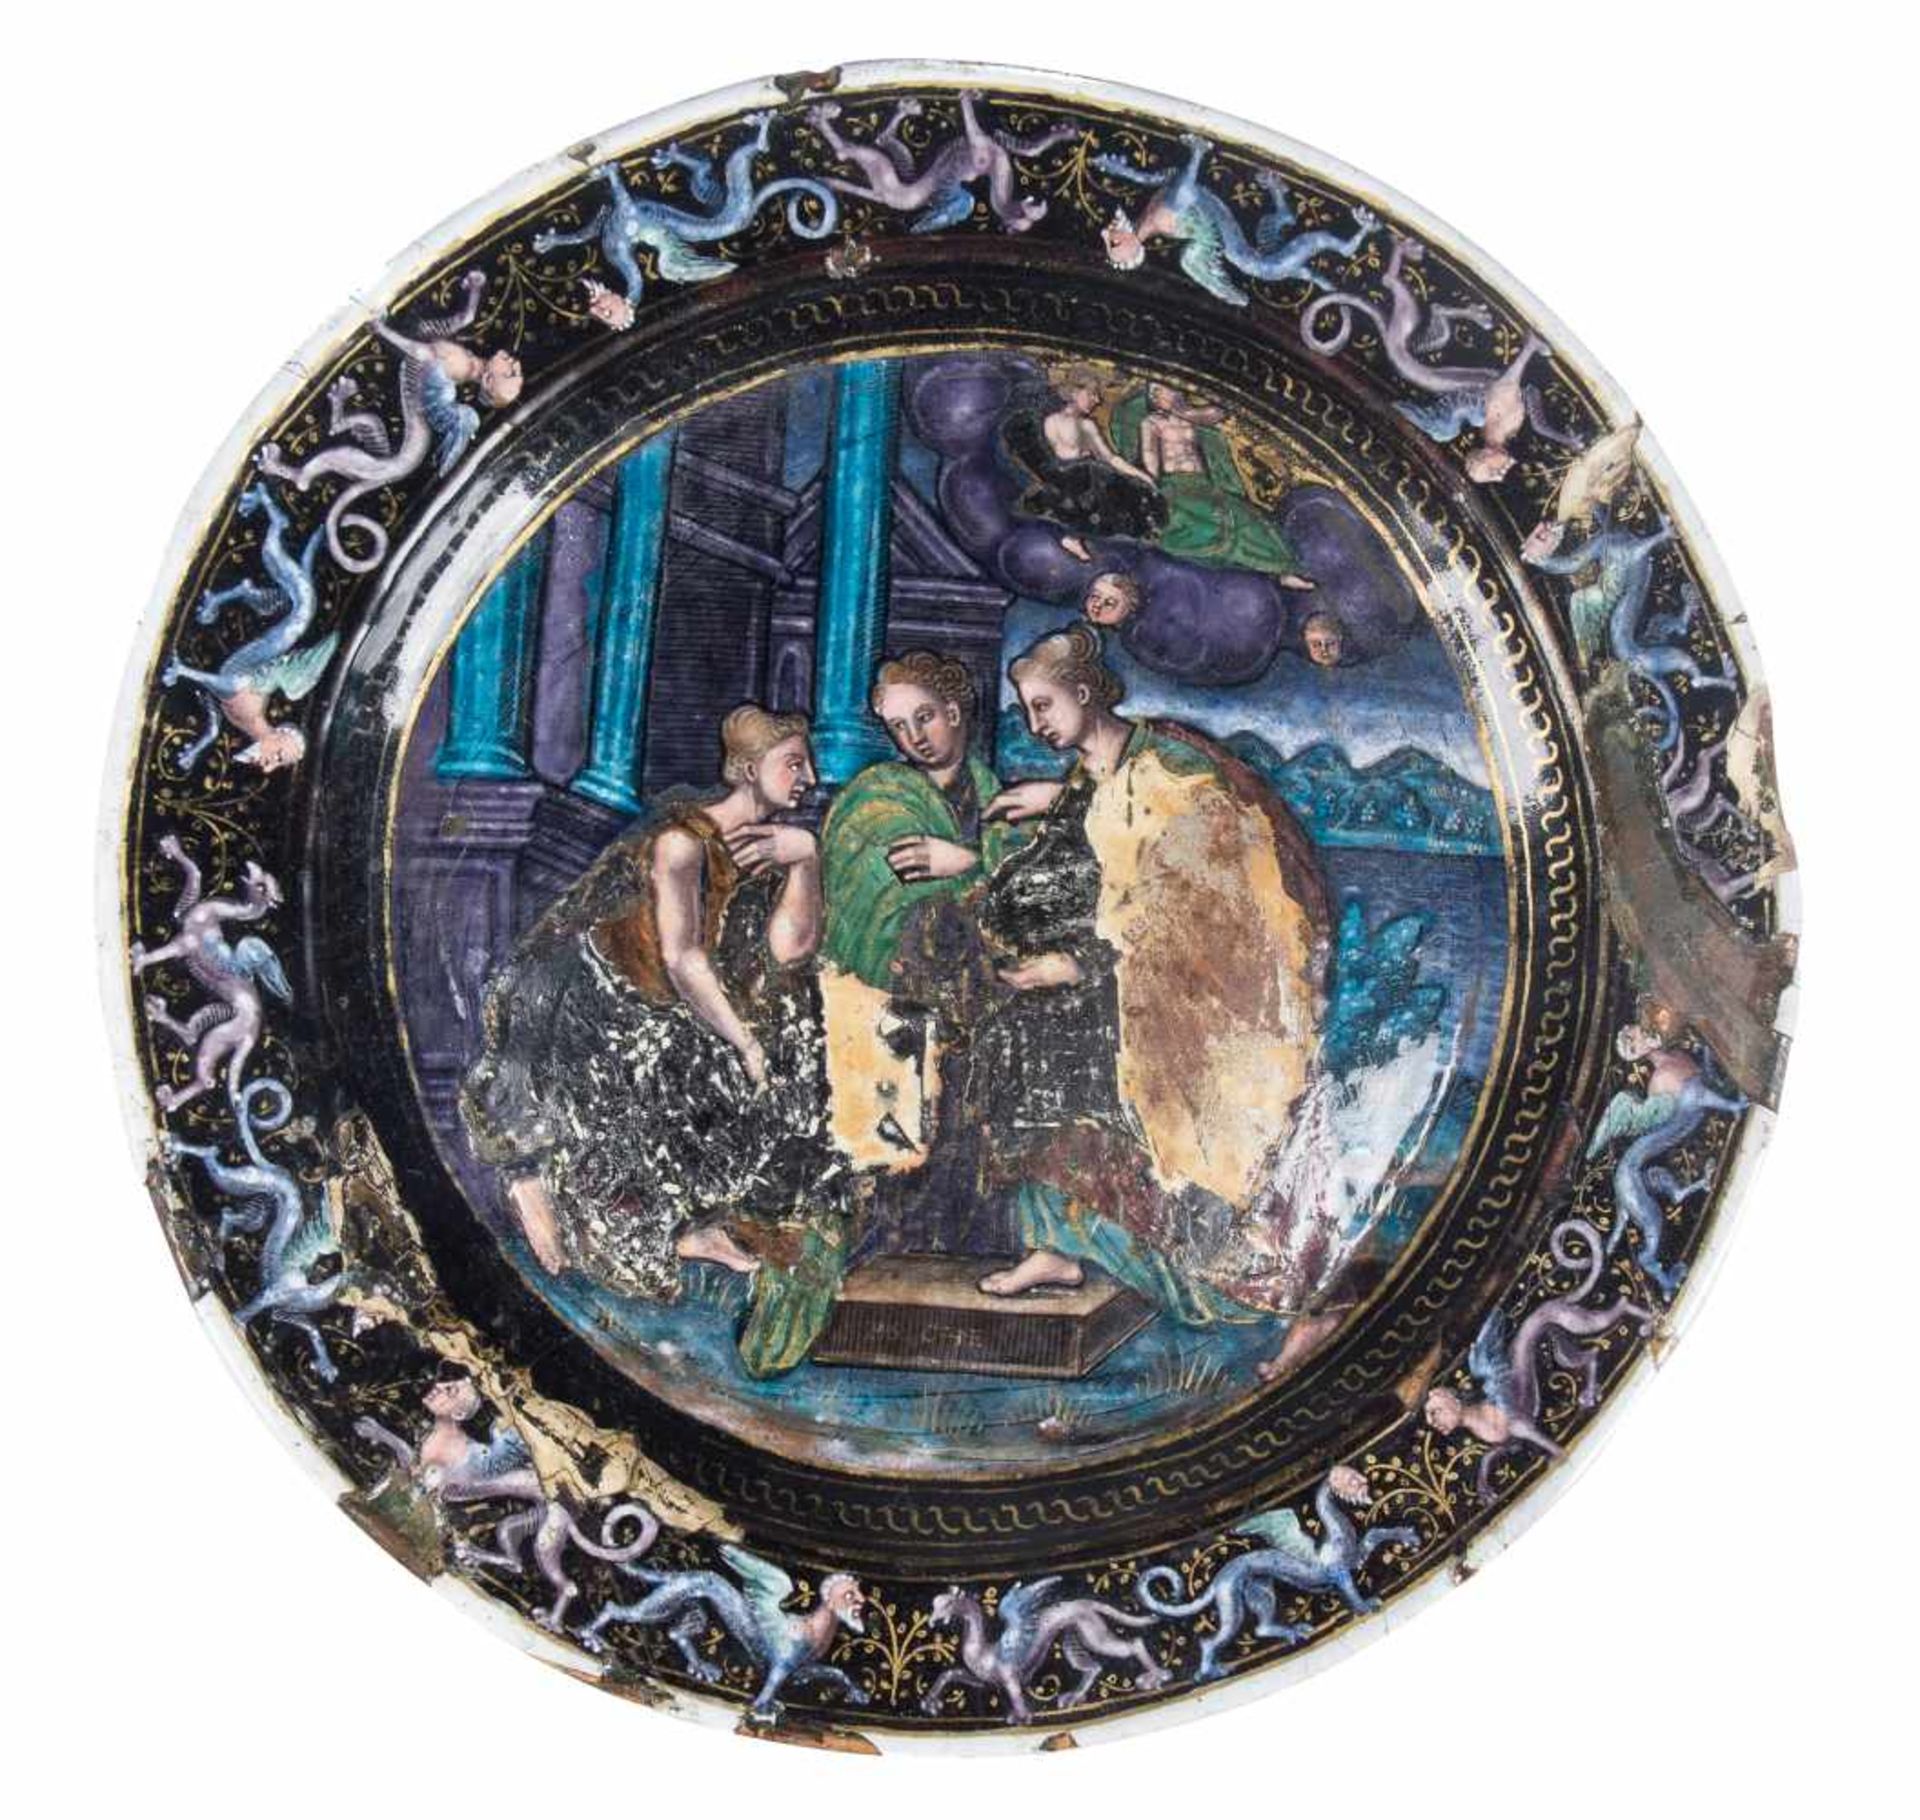 Enamelled copper plate. Limoges. France. Sixteenth century. Possibly from the workshop of Jean Court